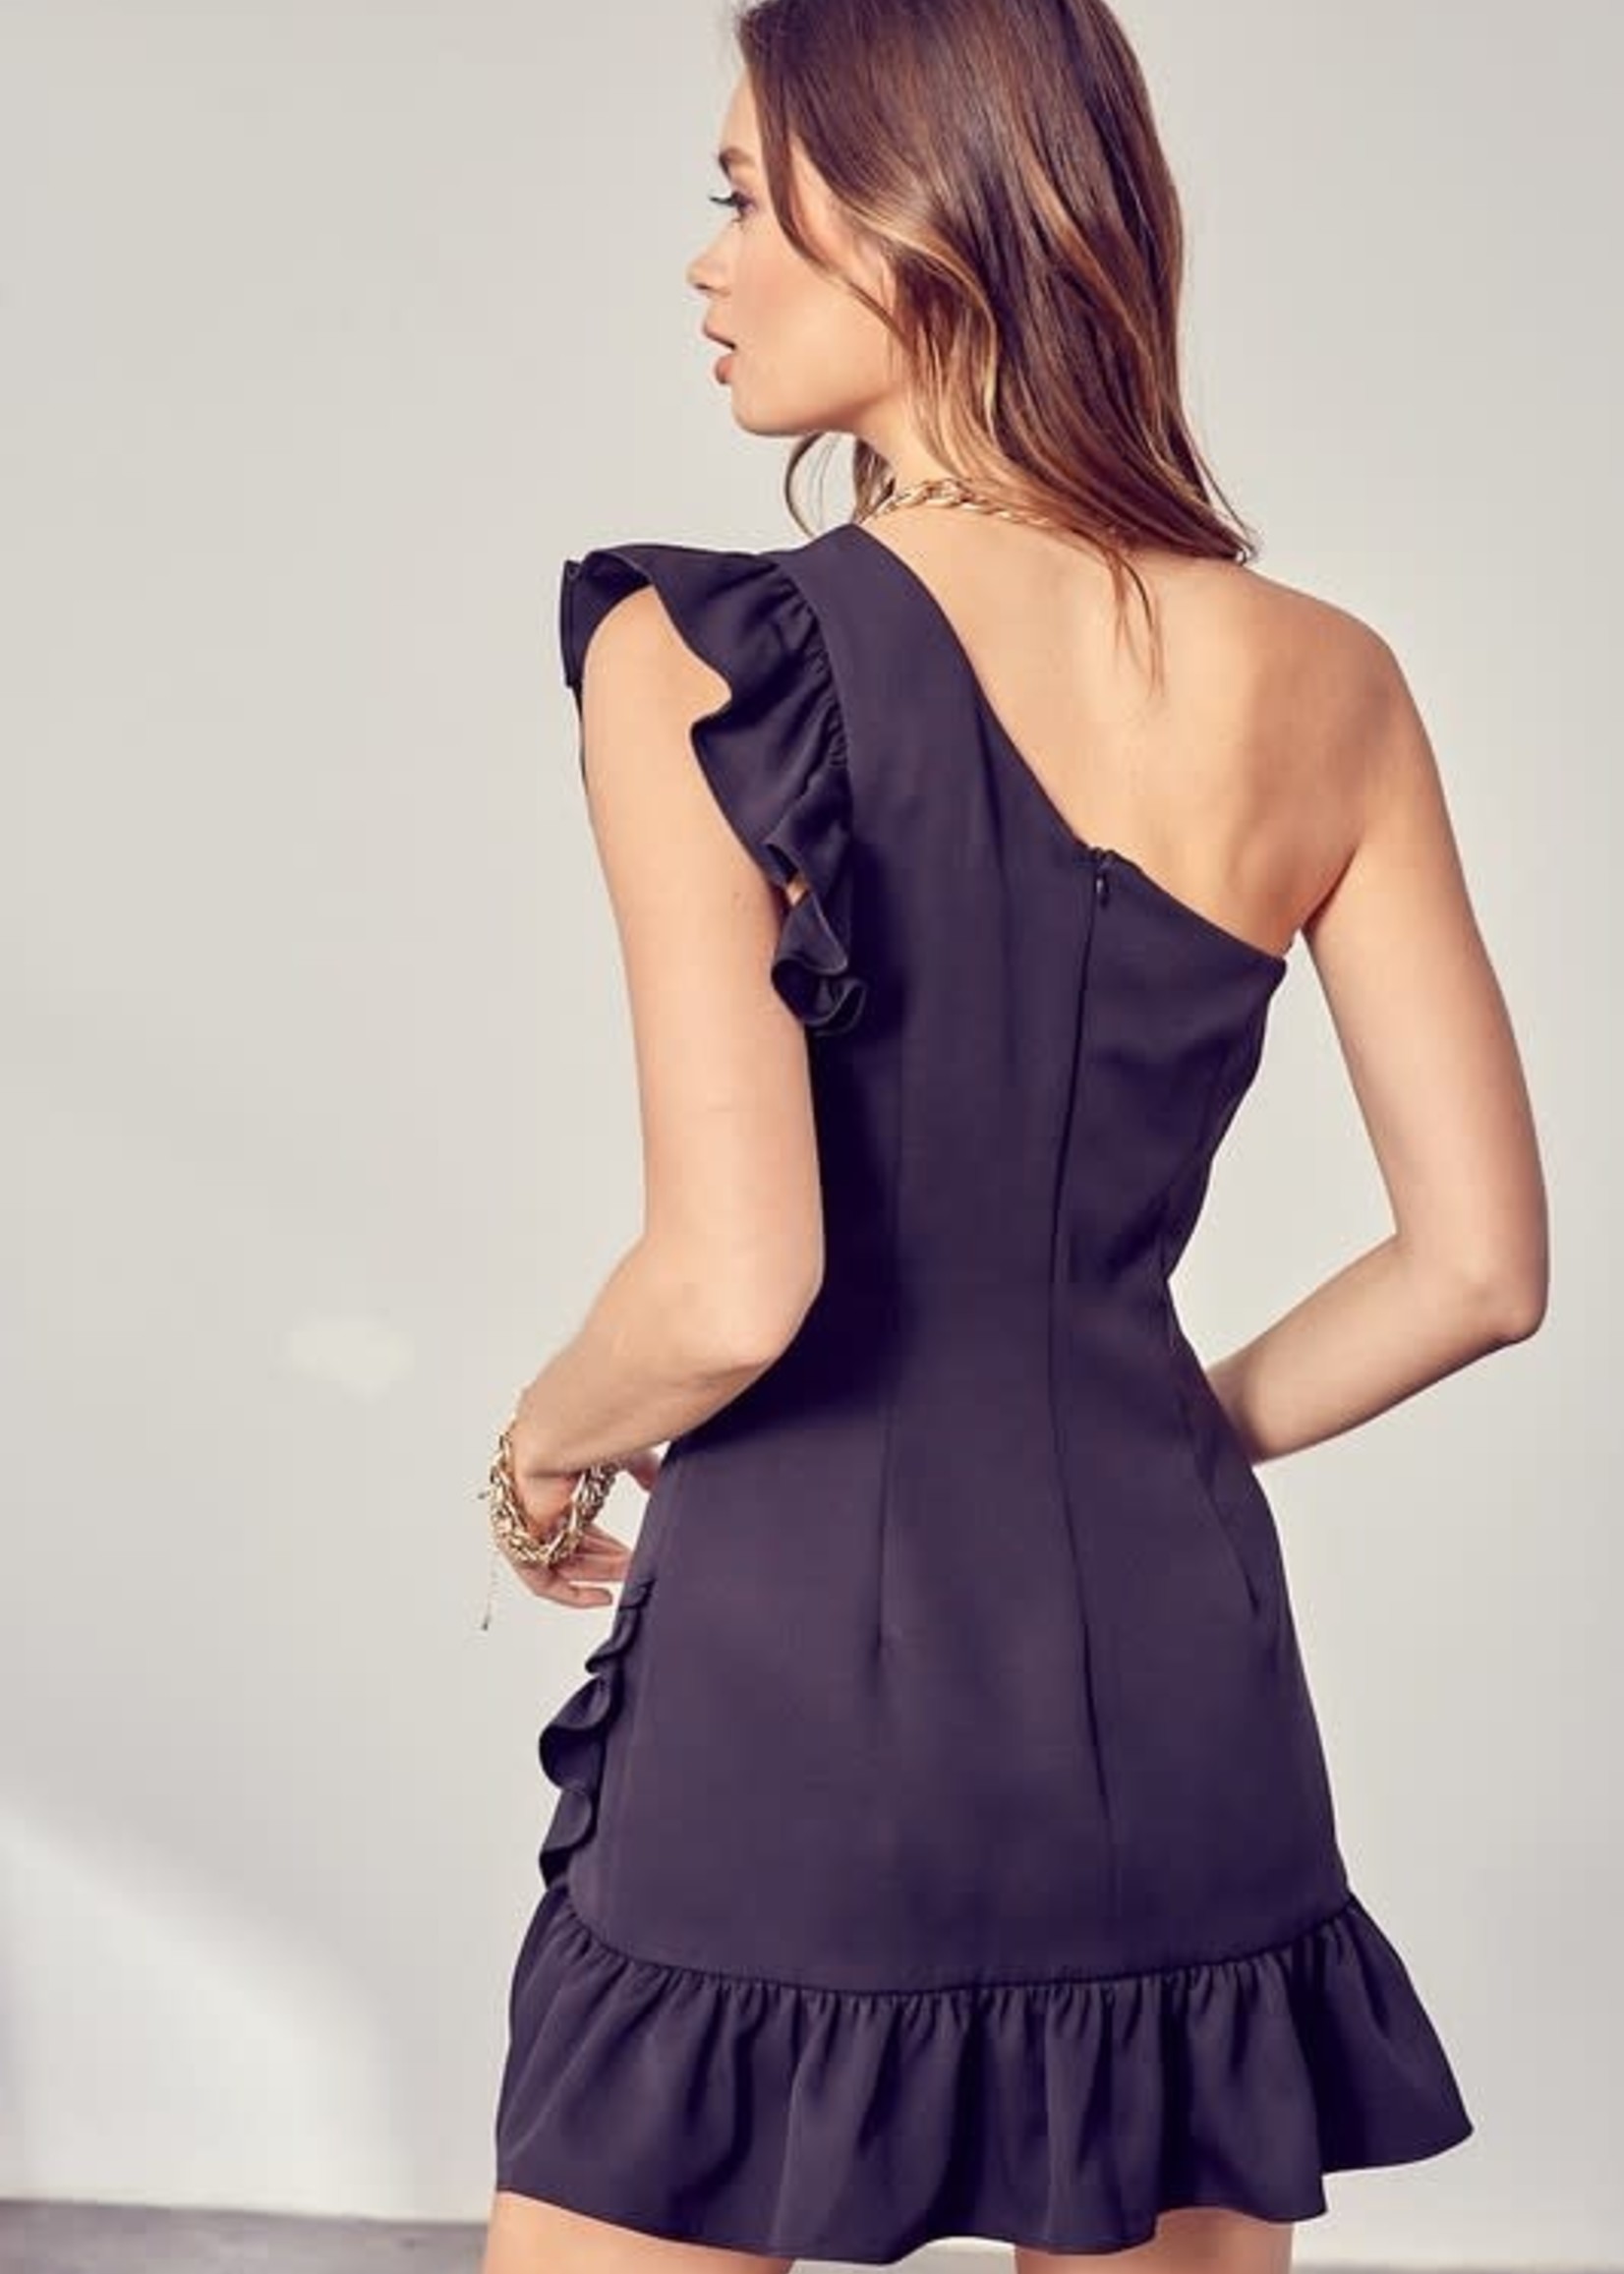 Ruffle One Shoulder Party LBD